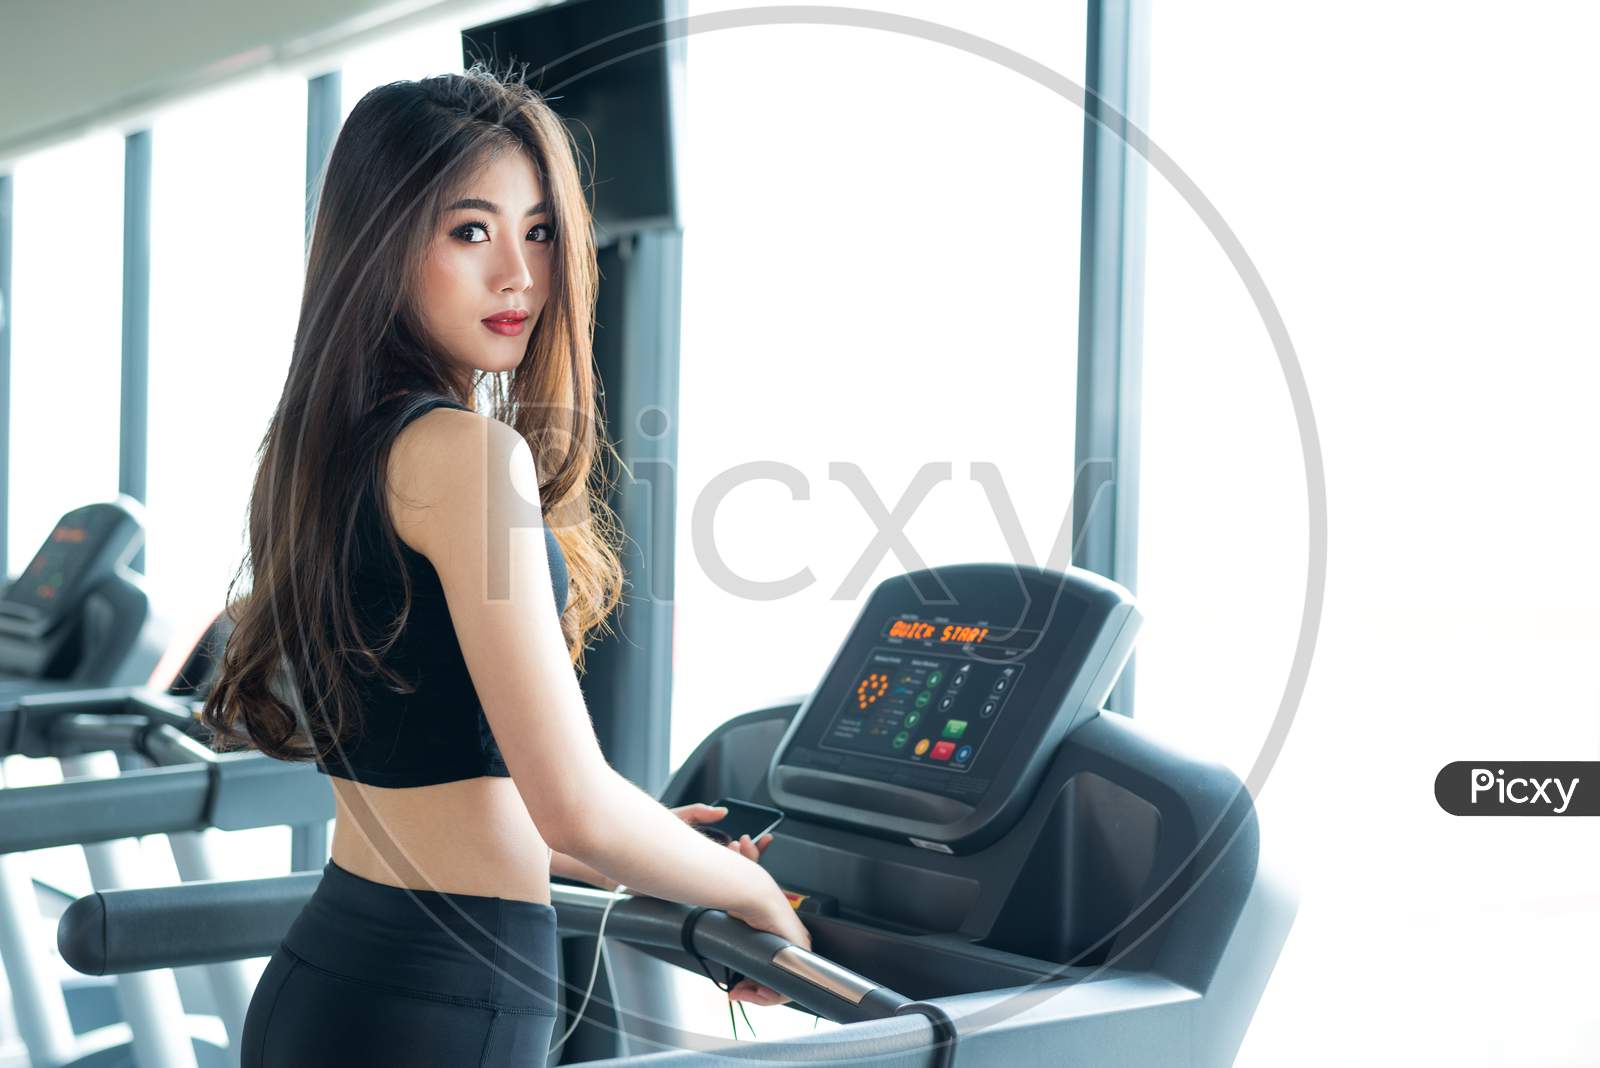 Asian Sport Woman Walking Or Running On Treadmill Equipment In Fitness Workout Gym. Sport And Beauty Concept. Workout And Strength Training Theme. Cardio And Diet Theme. Woman Portrait